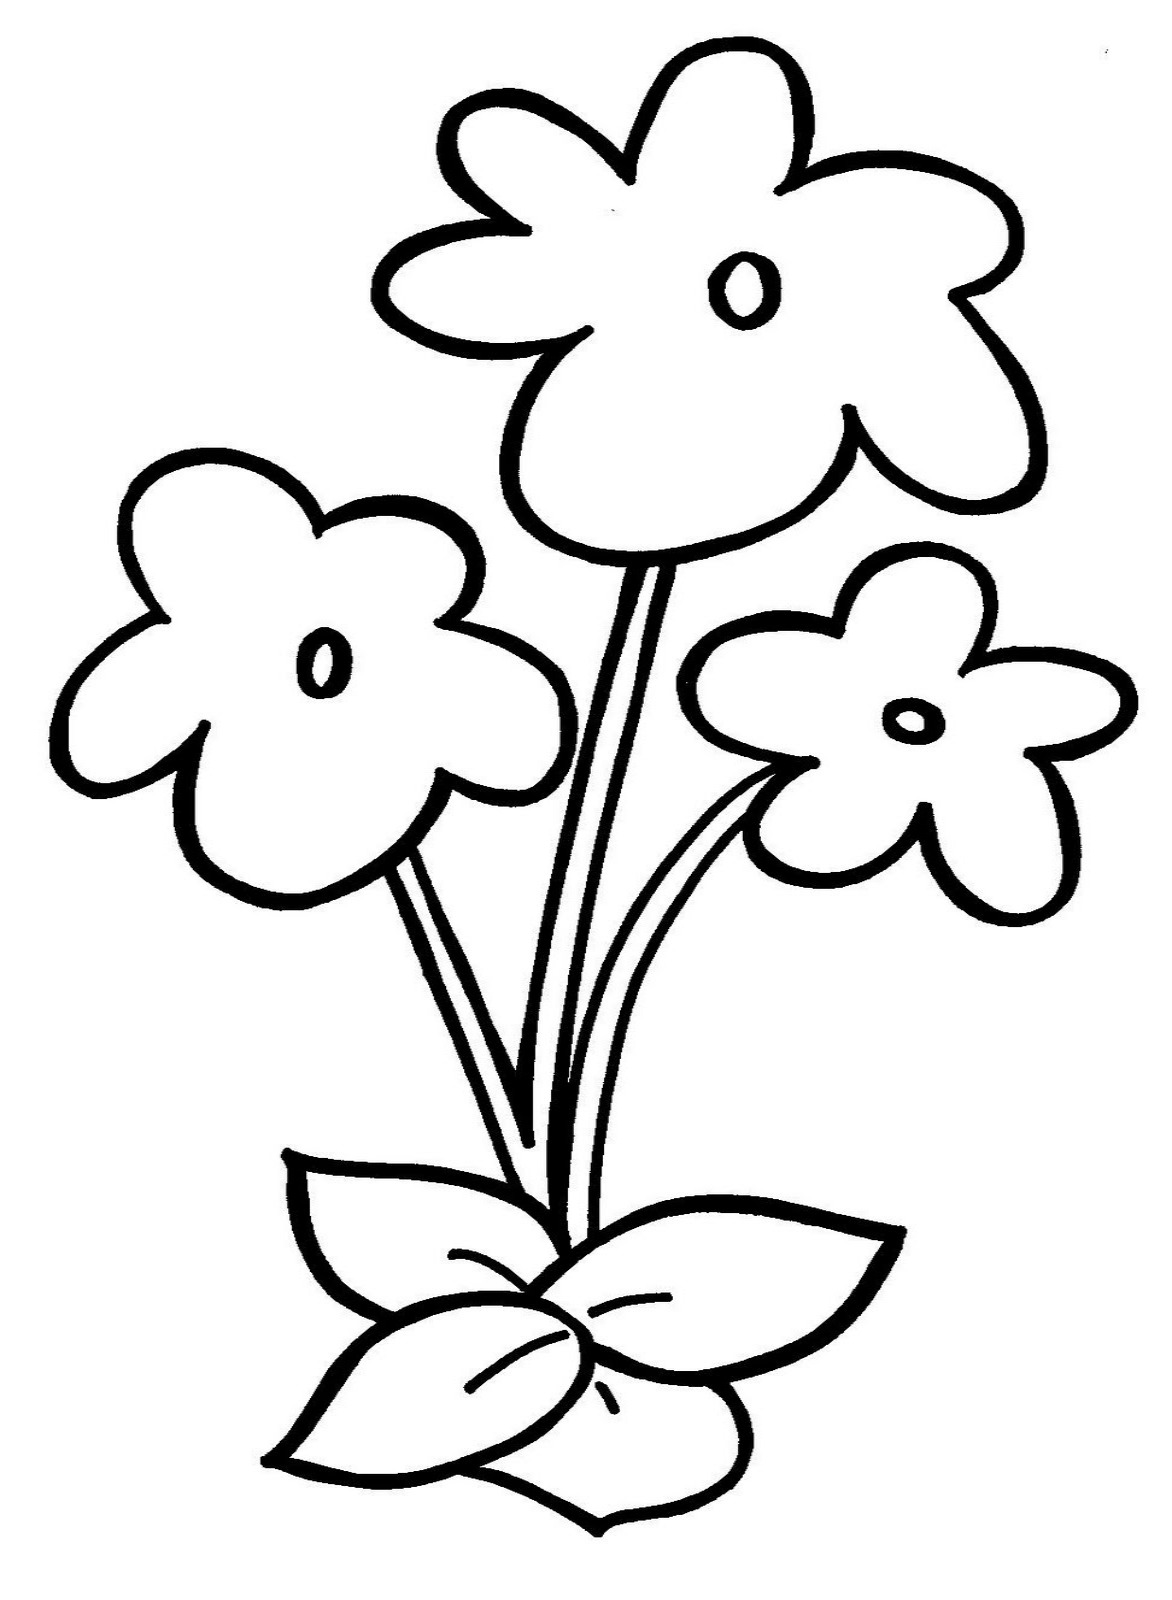 Free coloring pages of simple flower